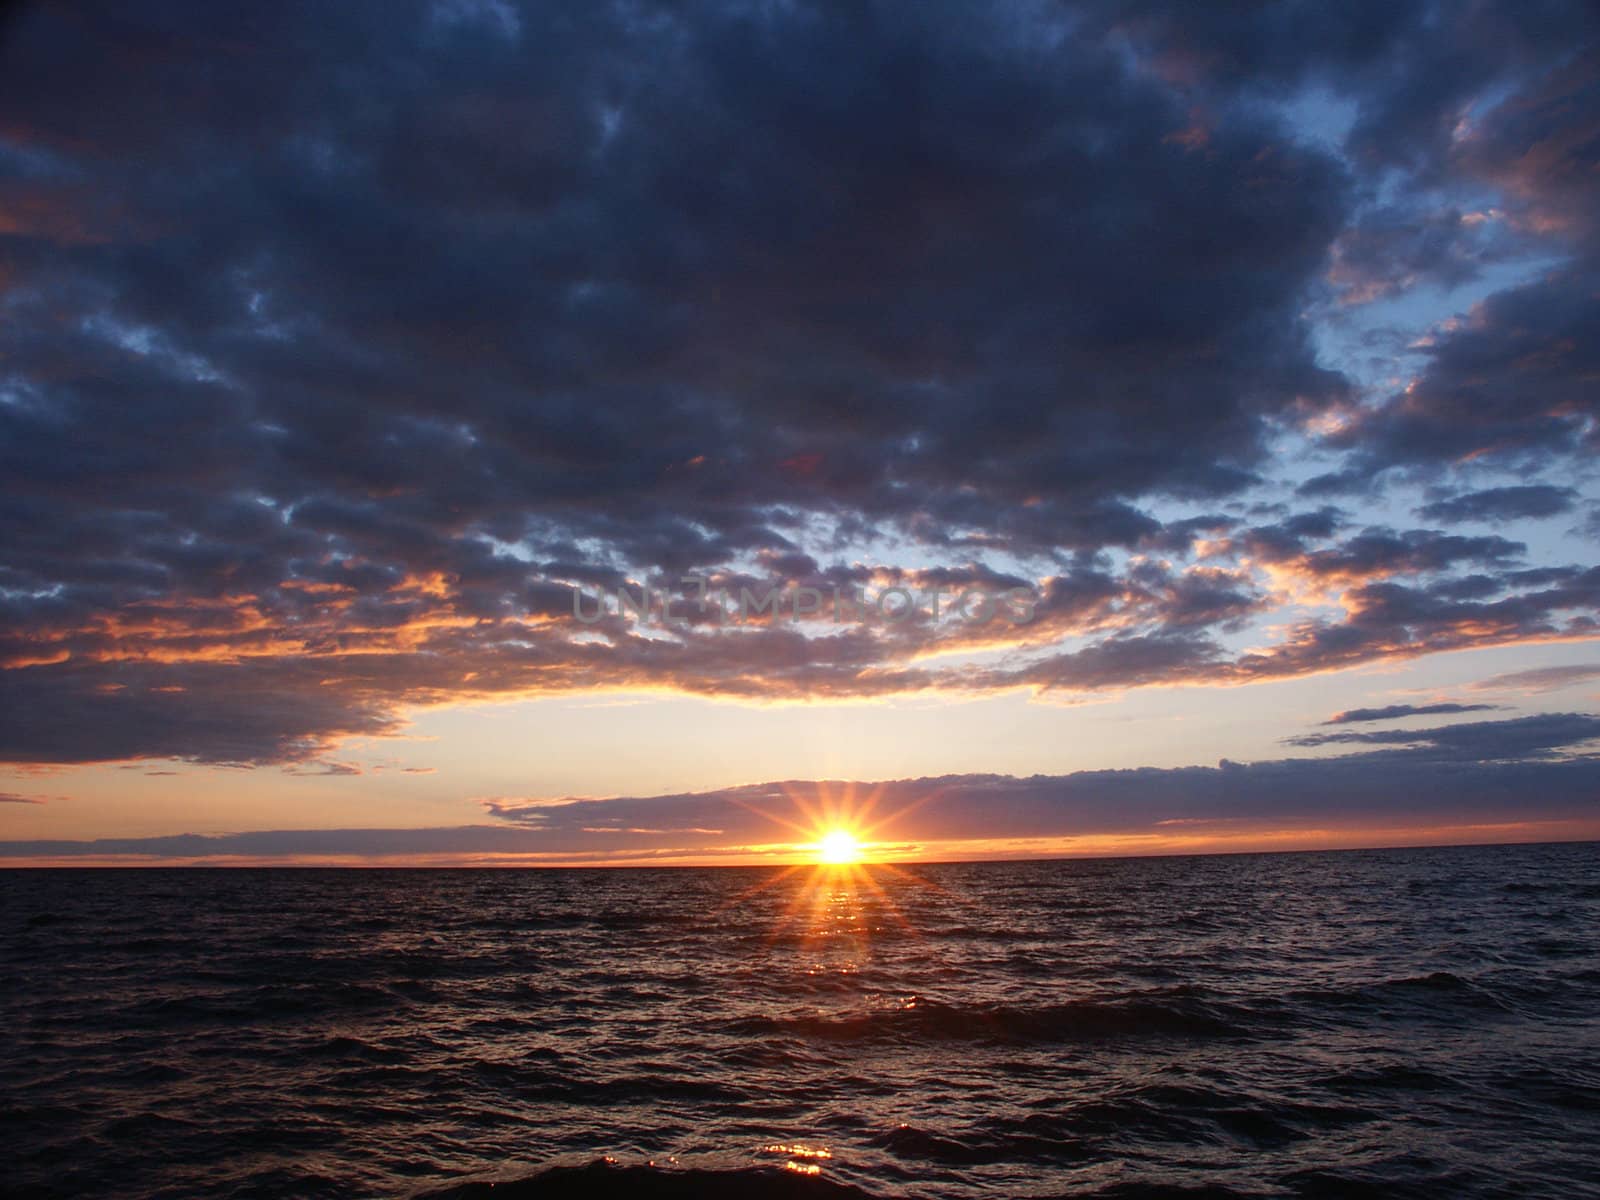 Lake Superior Sunset by Wirepec